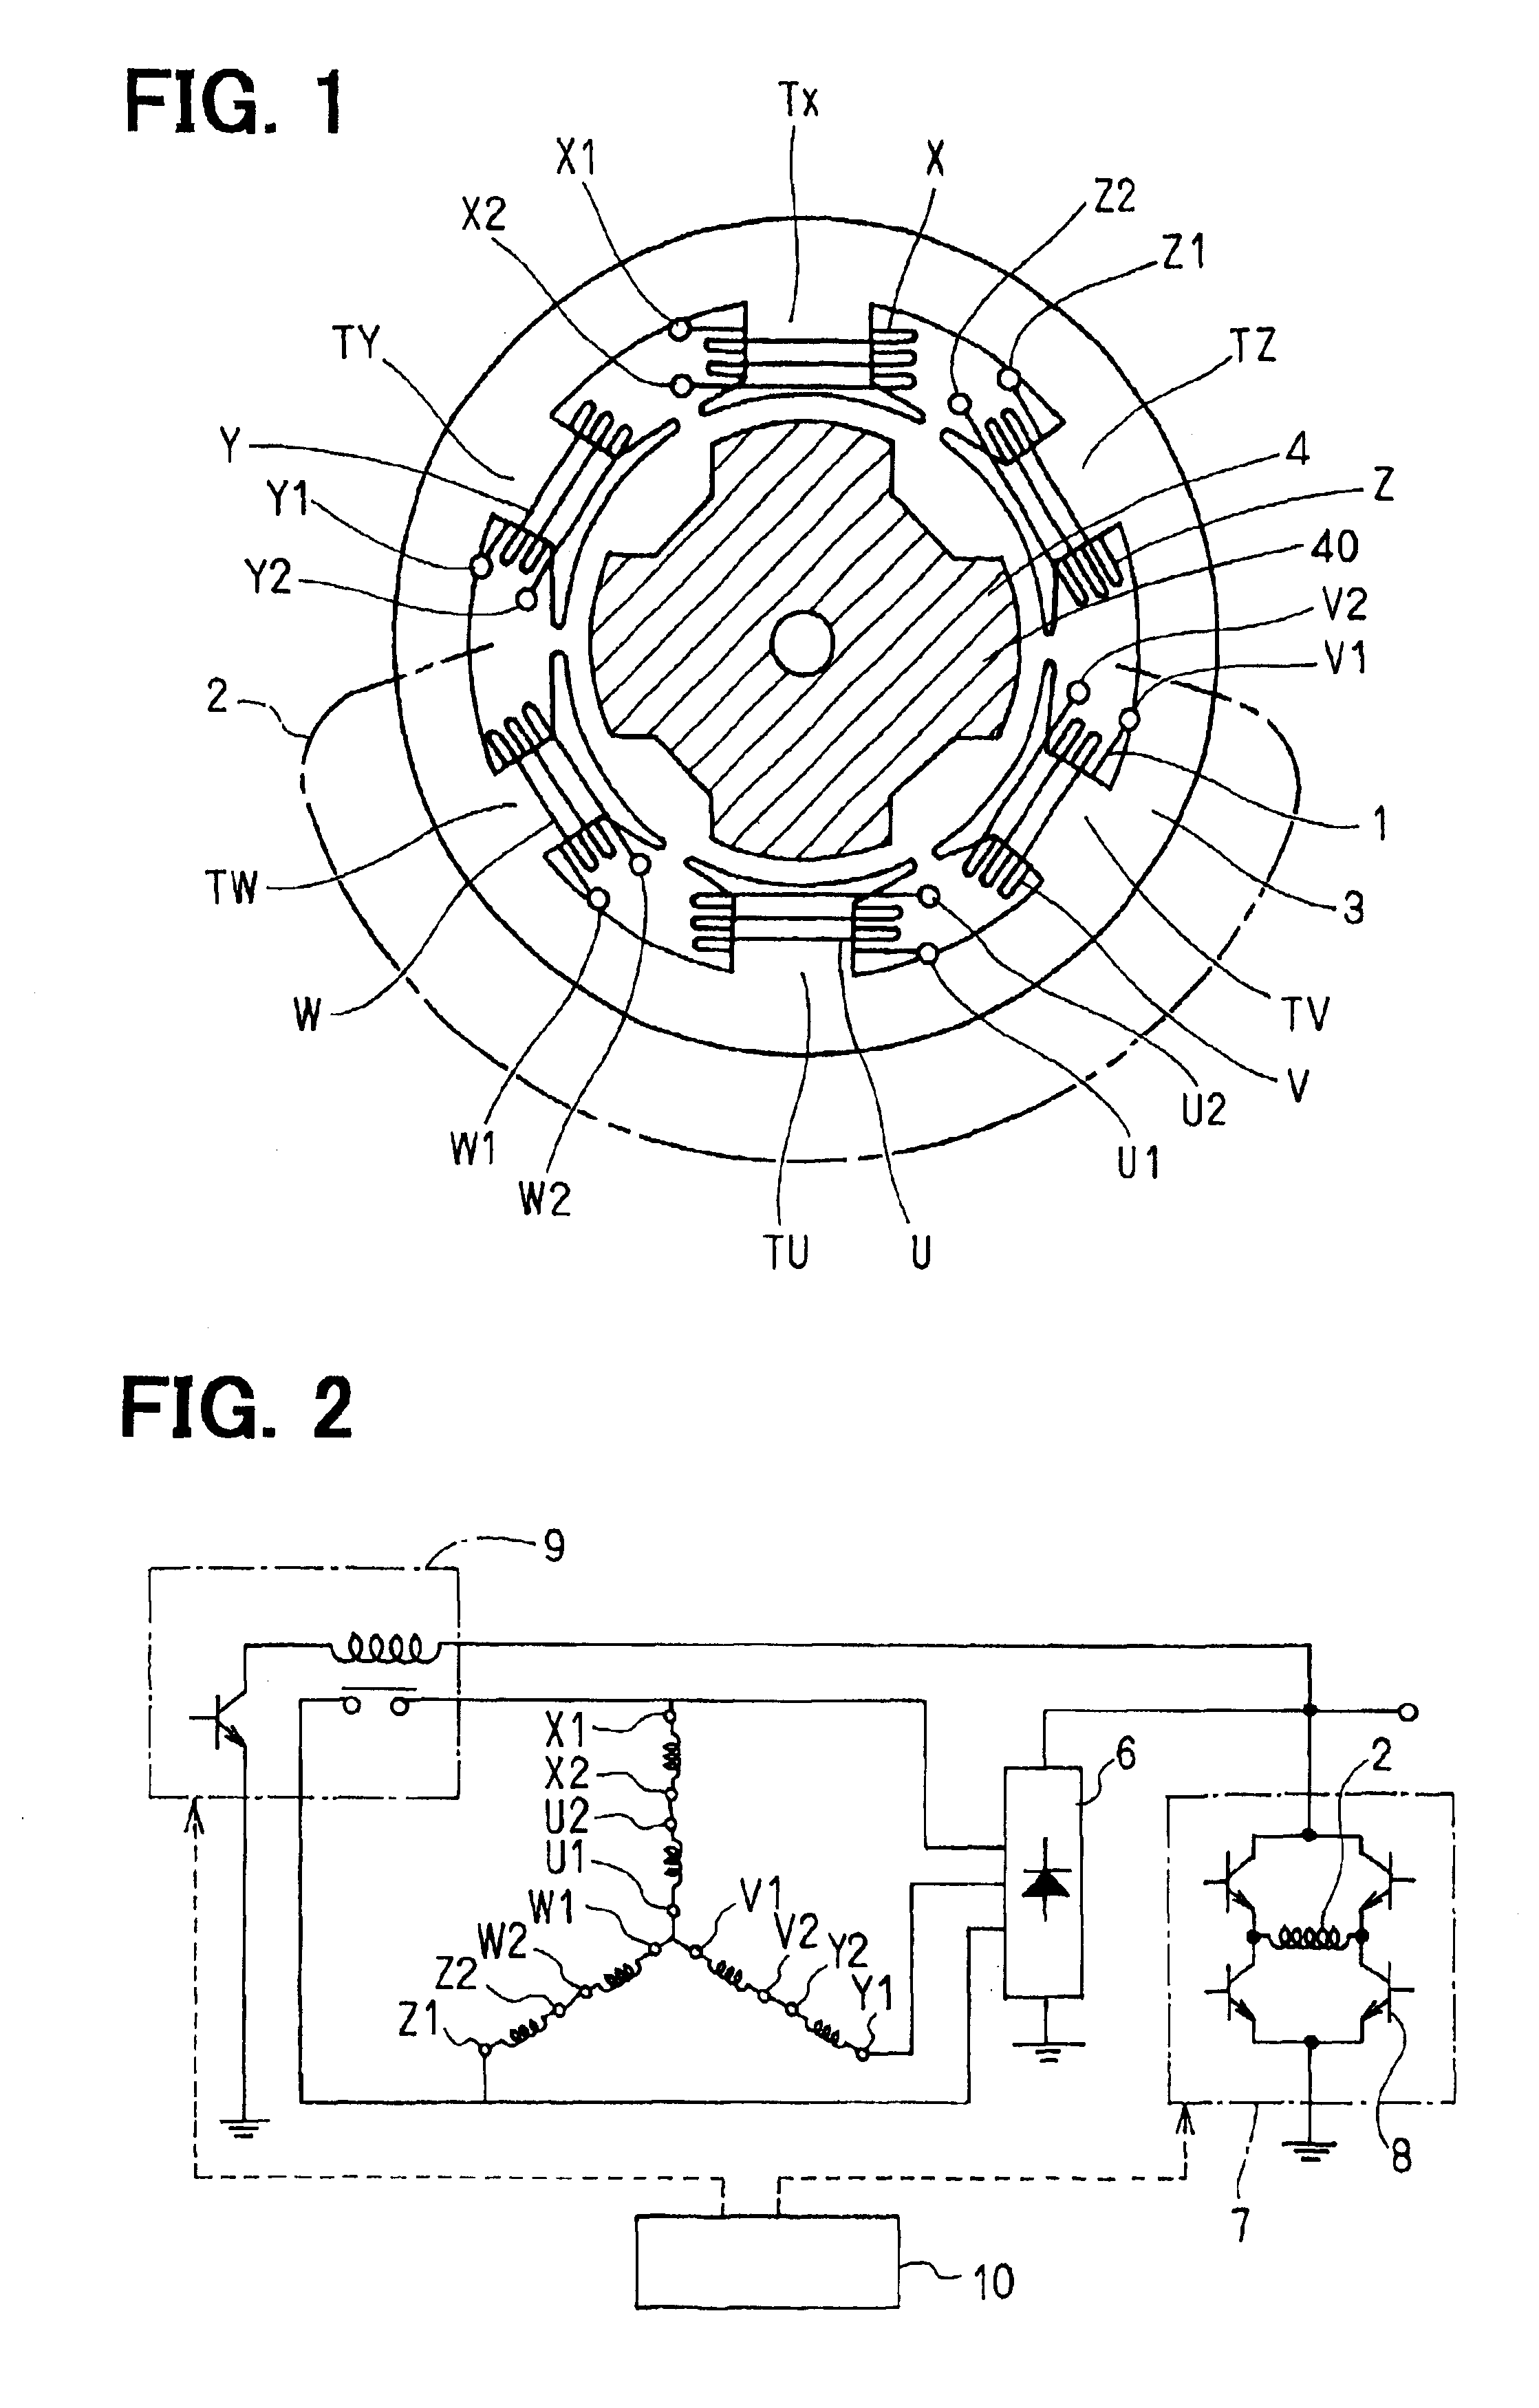 Induction machine with motor and generator operation modes